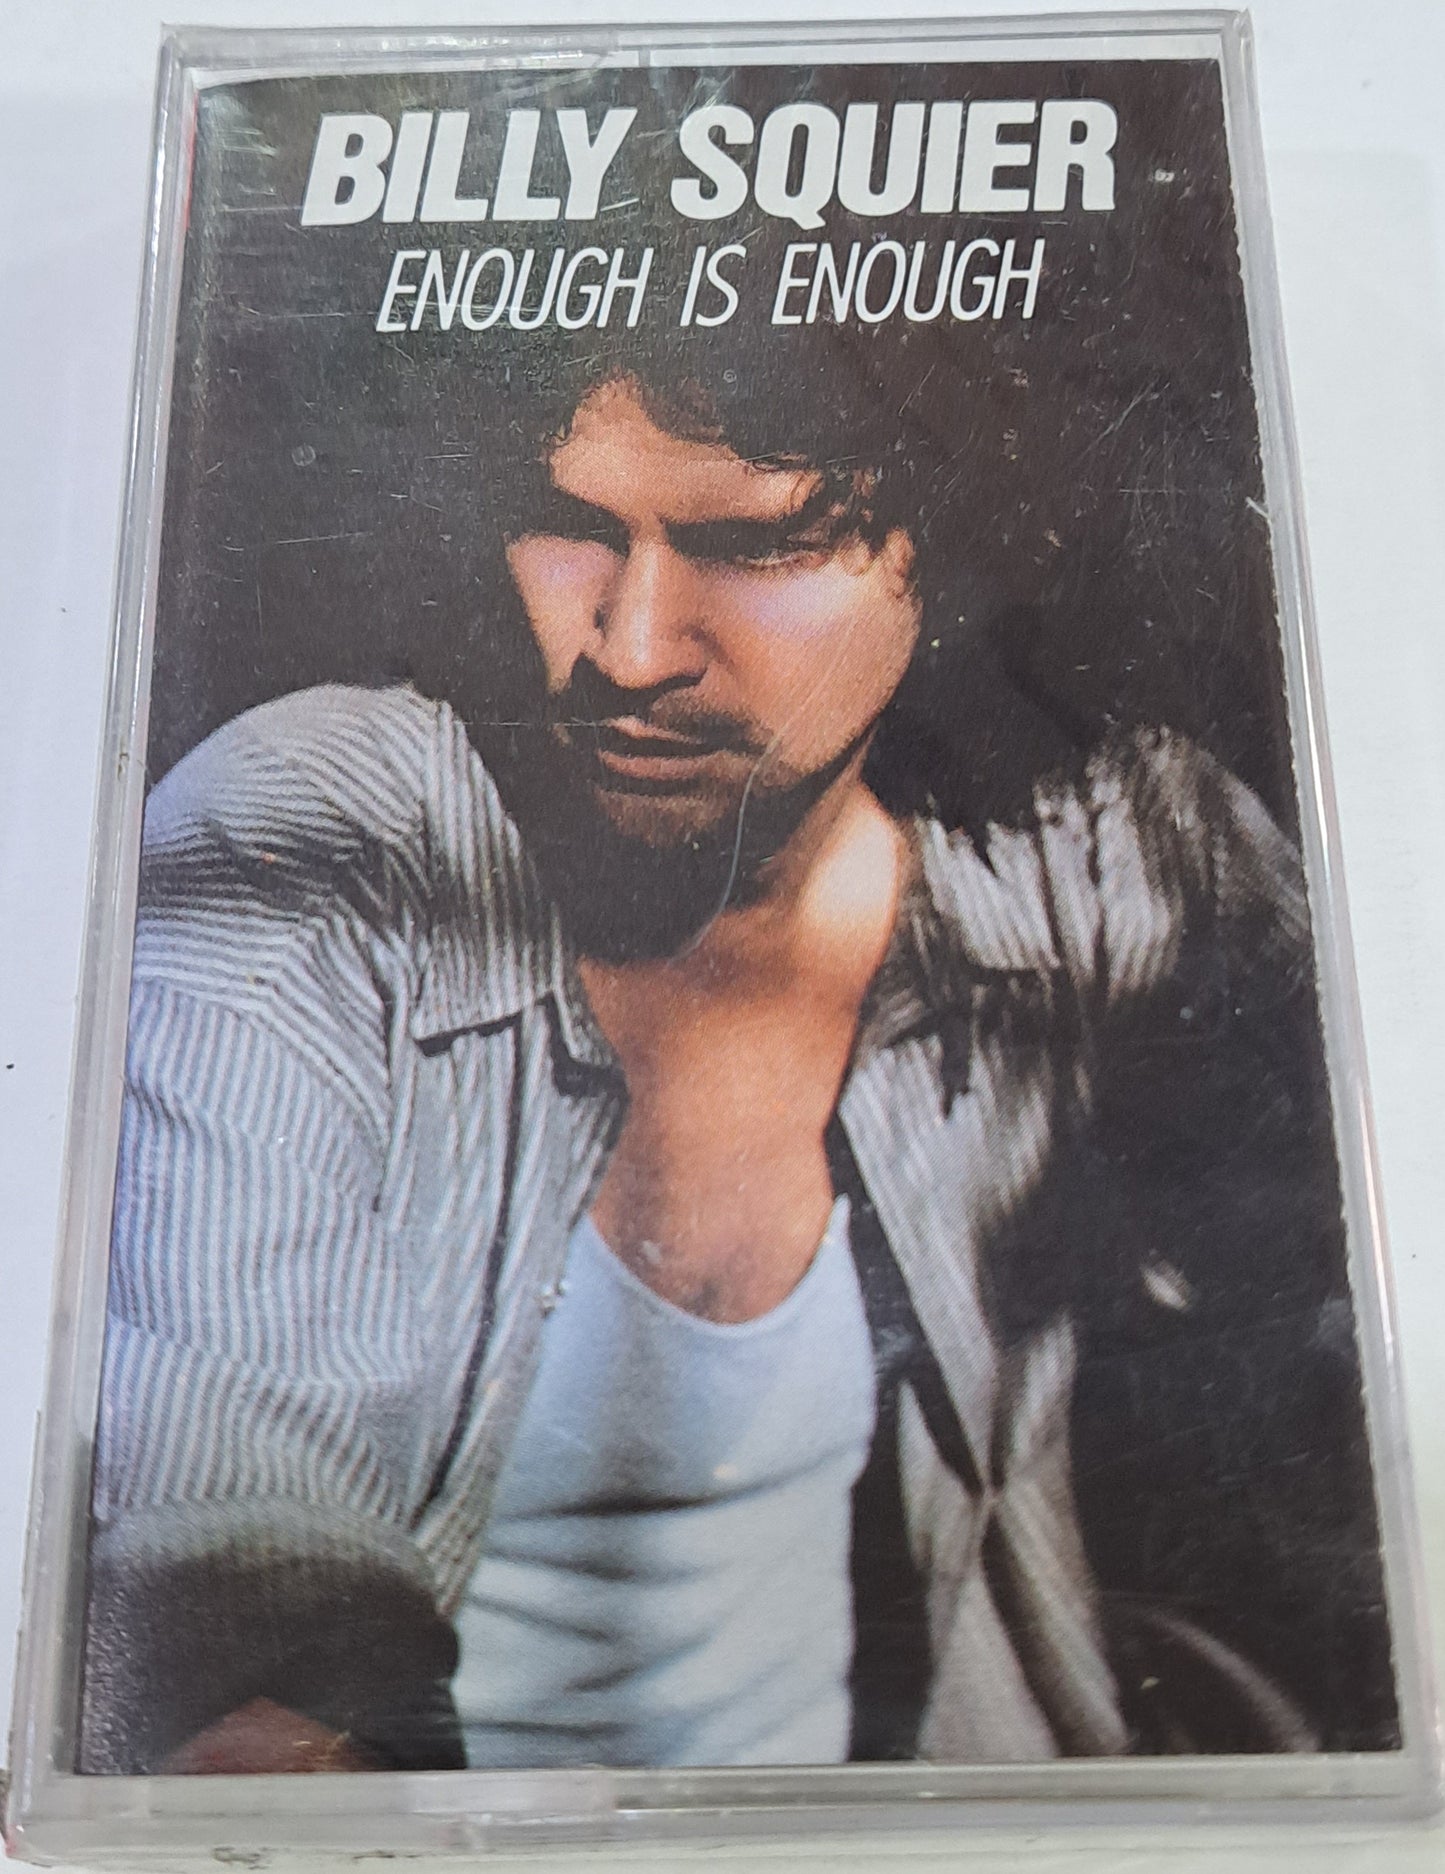 BILLY SQUIER - ENOUGH IS ENOUGH  CASSETTE